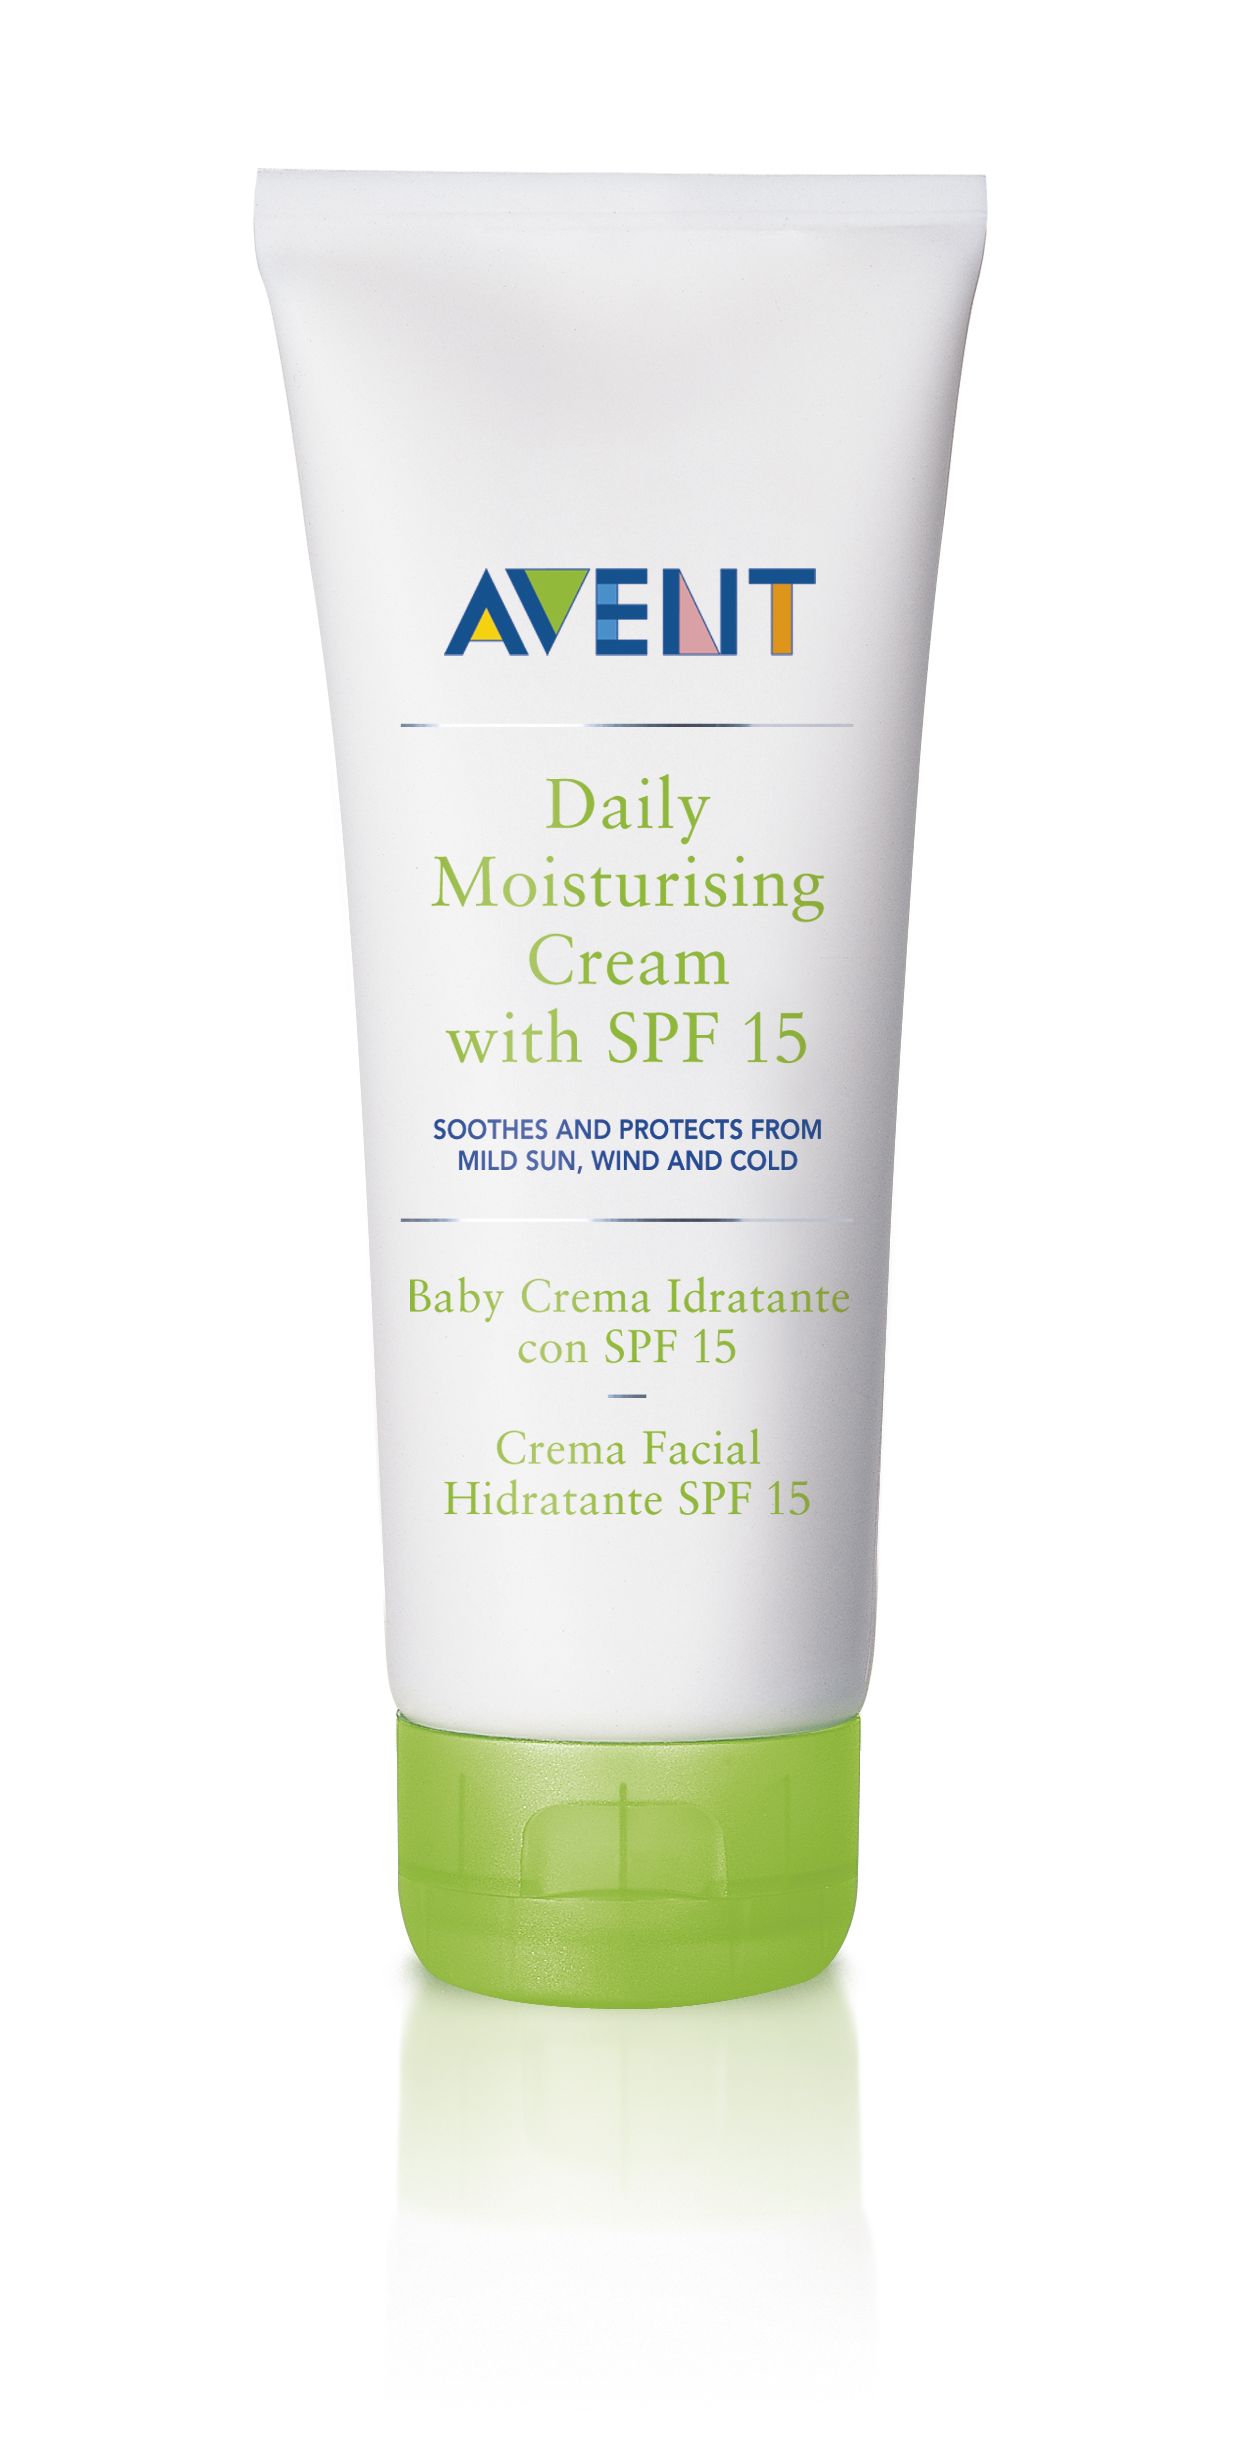 Soothes and protects from mild sun, wind and cold